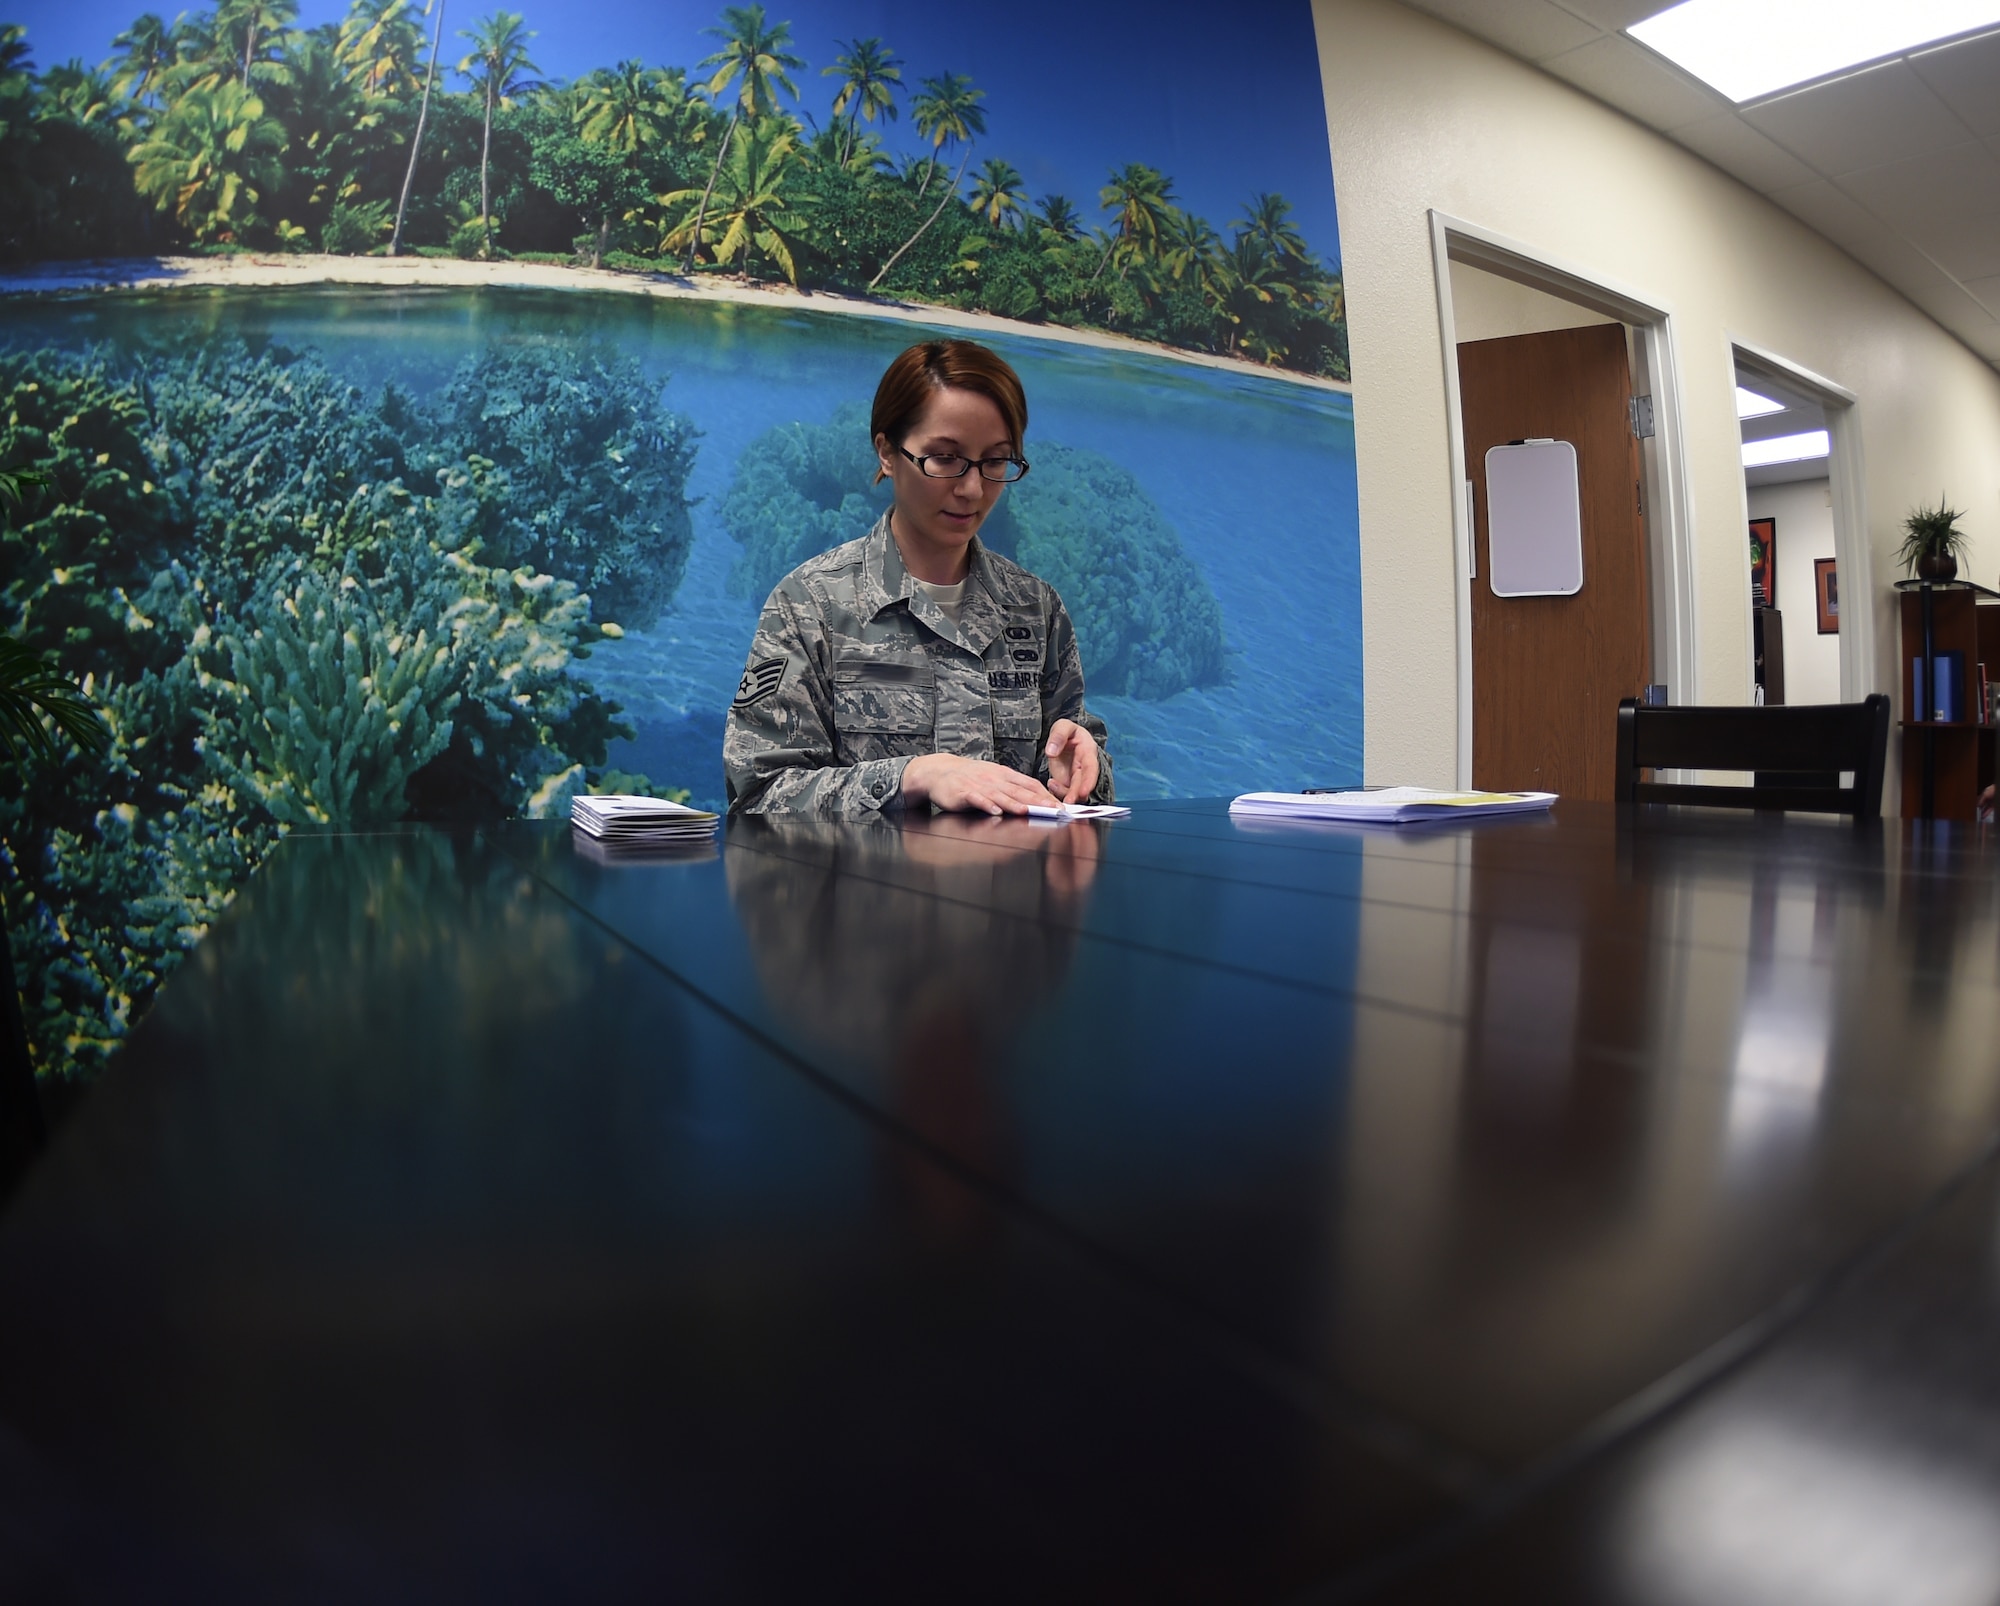 Staff Sgt. Sarah, 452nd Air Mobility Wing chaplain assistant, prepares for a meeting with the chaplain corps Jan. 20, 2016, at Creech Air Force Base, Nevada. Sarah and Chaplain (Maj.) Cameron, 47th Flying Training Wing Individual Mobilization Augmentee, are new additions to the Creech team. Adding to the manning at the Airman Ministry Center has increased chaplain availability for Airmen seeking spiritual and religious guidance. (U.S. Air Force Photo by Airman 1st Class Kristan Campbell/ released)